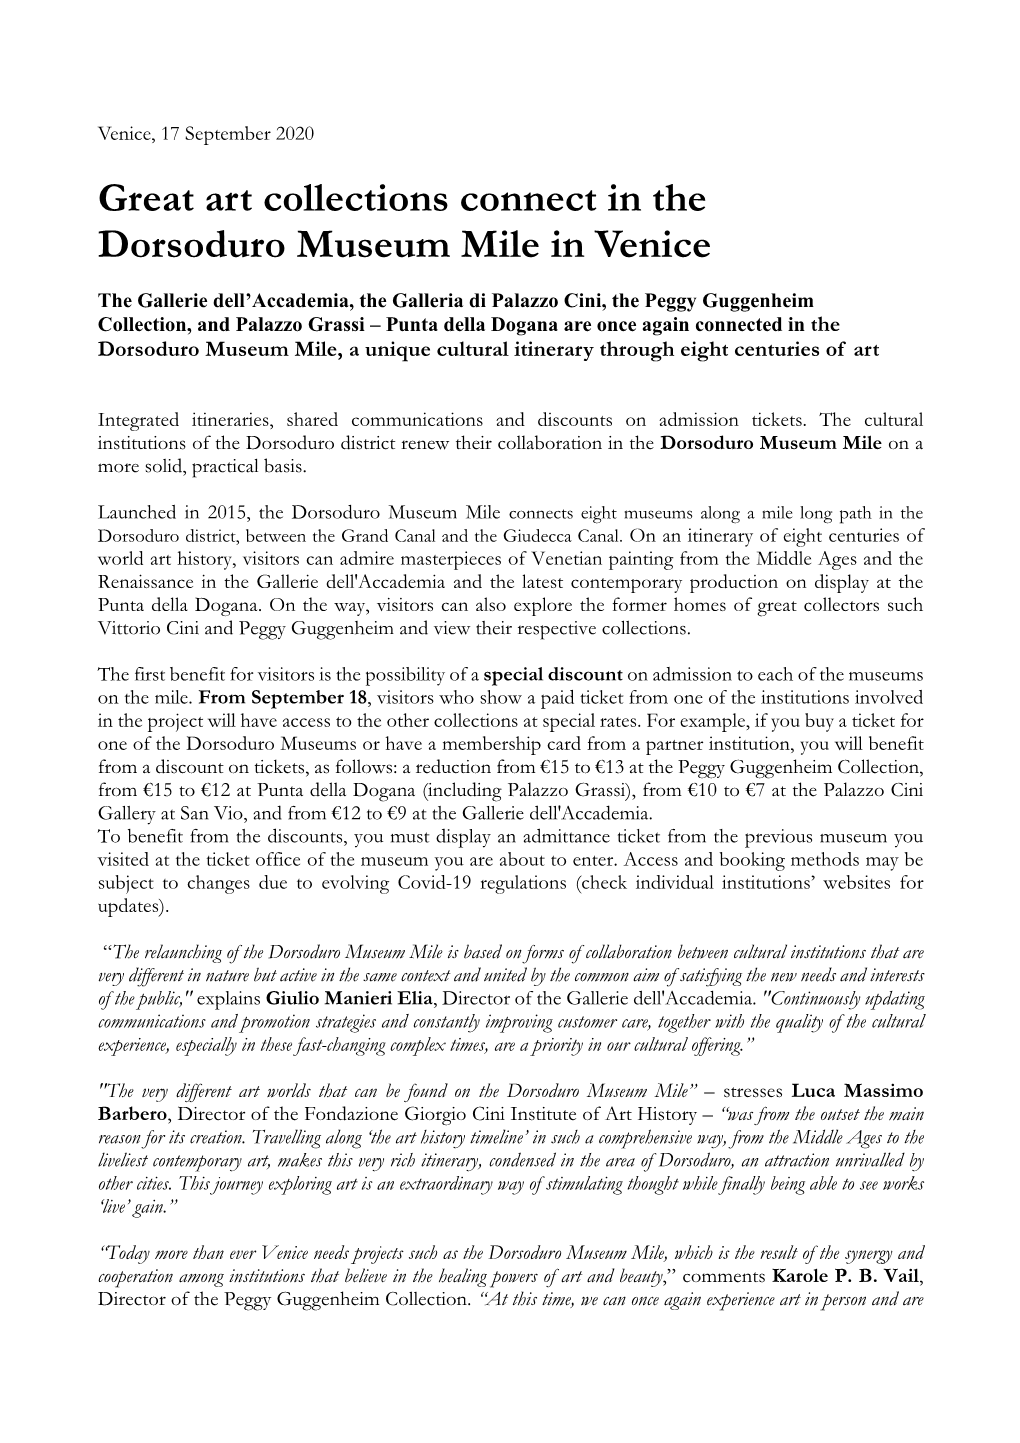 Great Art Collections Connect in the Dorsoduro Museum Mile in Venice